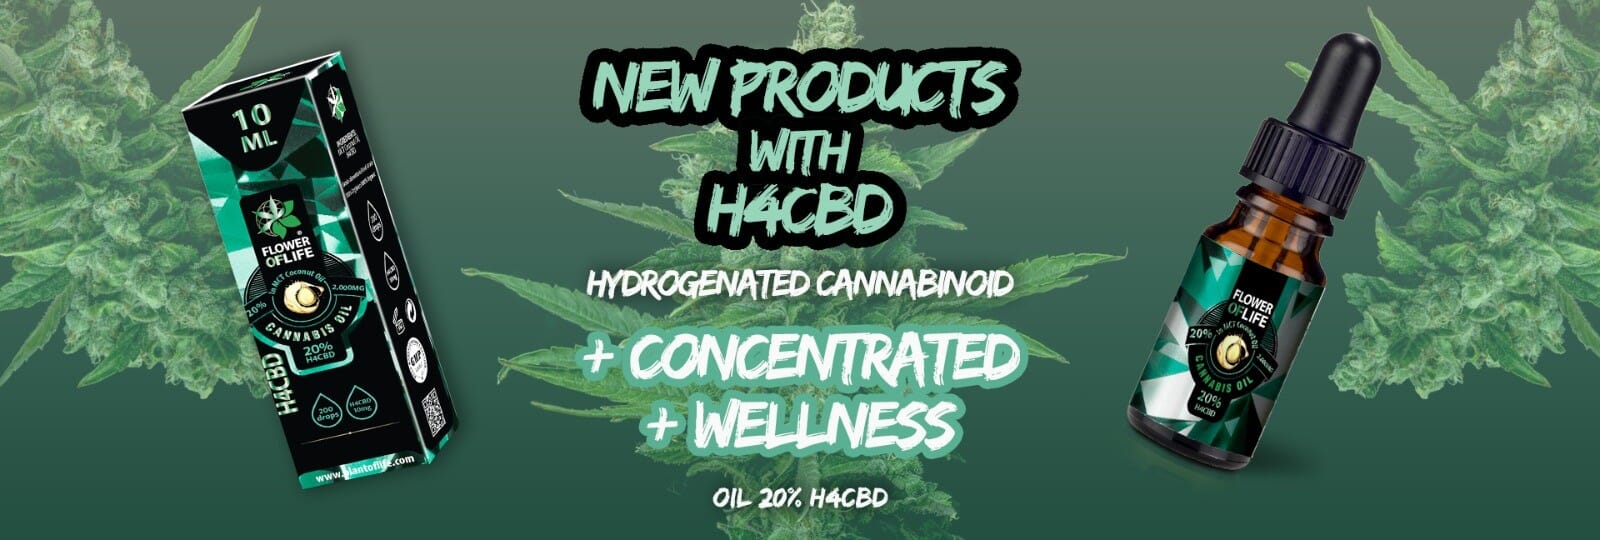 NEW COCONUT OIL WITH 20% H4CBD